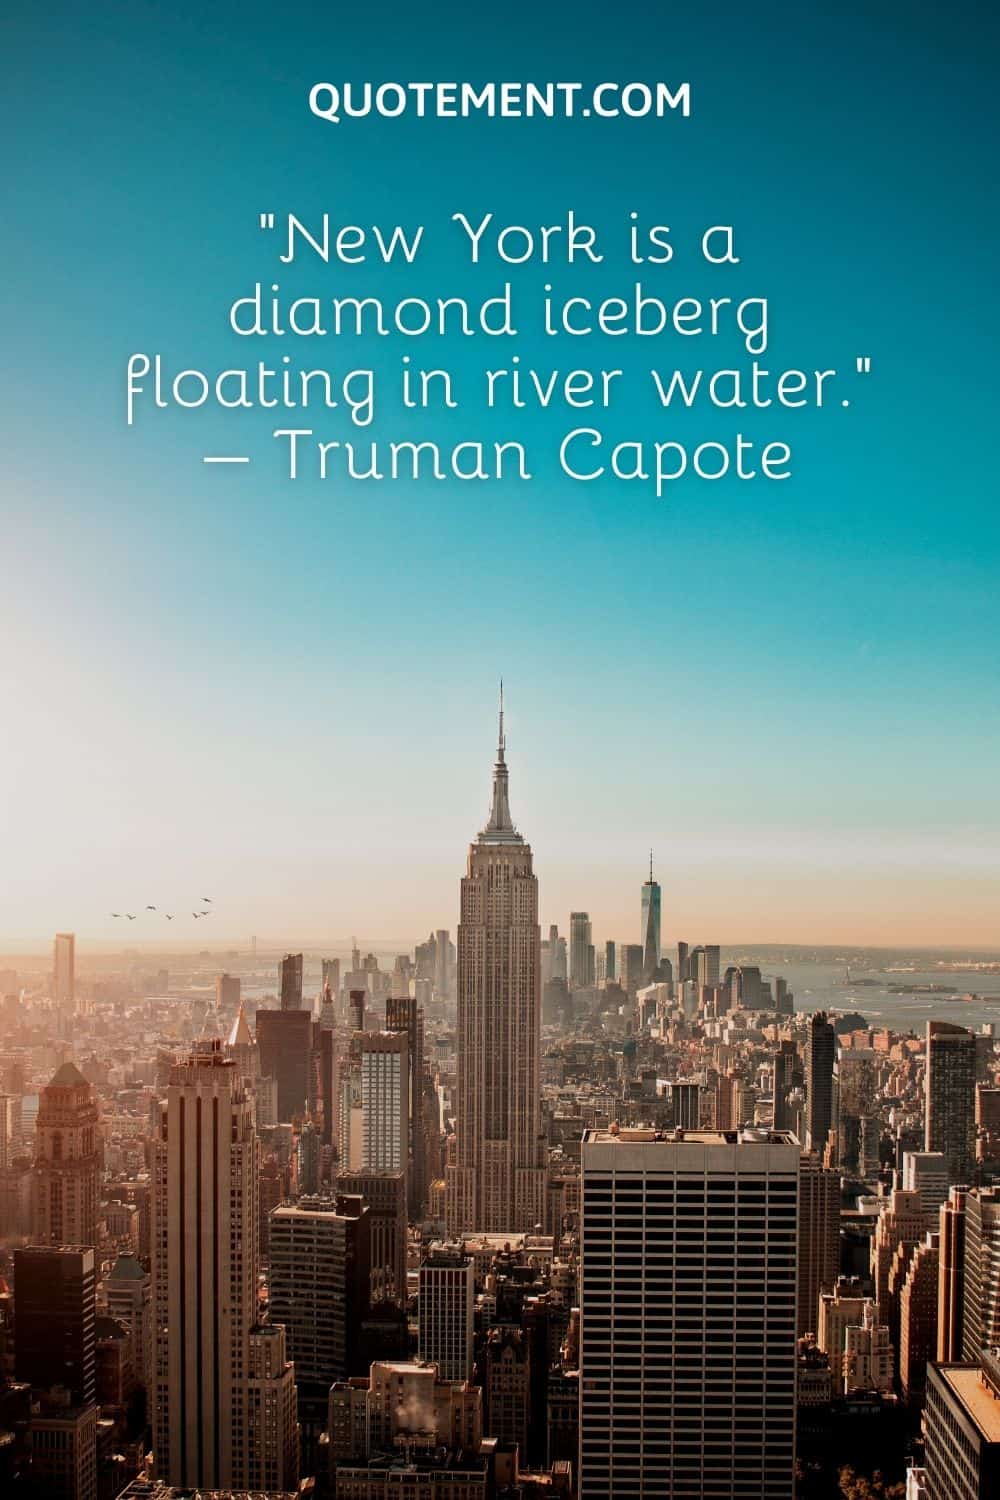 New York is a diamond iceberg floating in river water